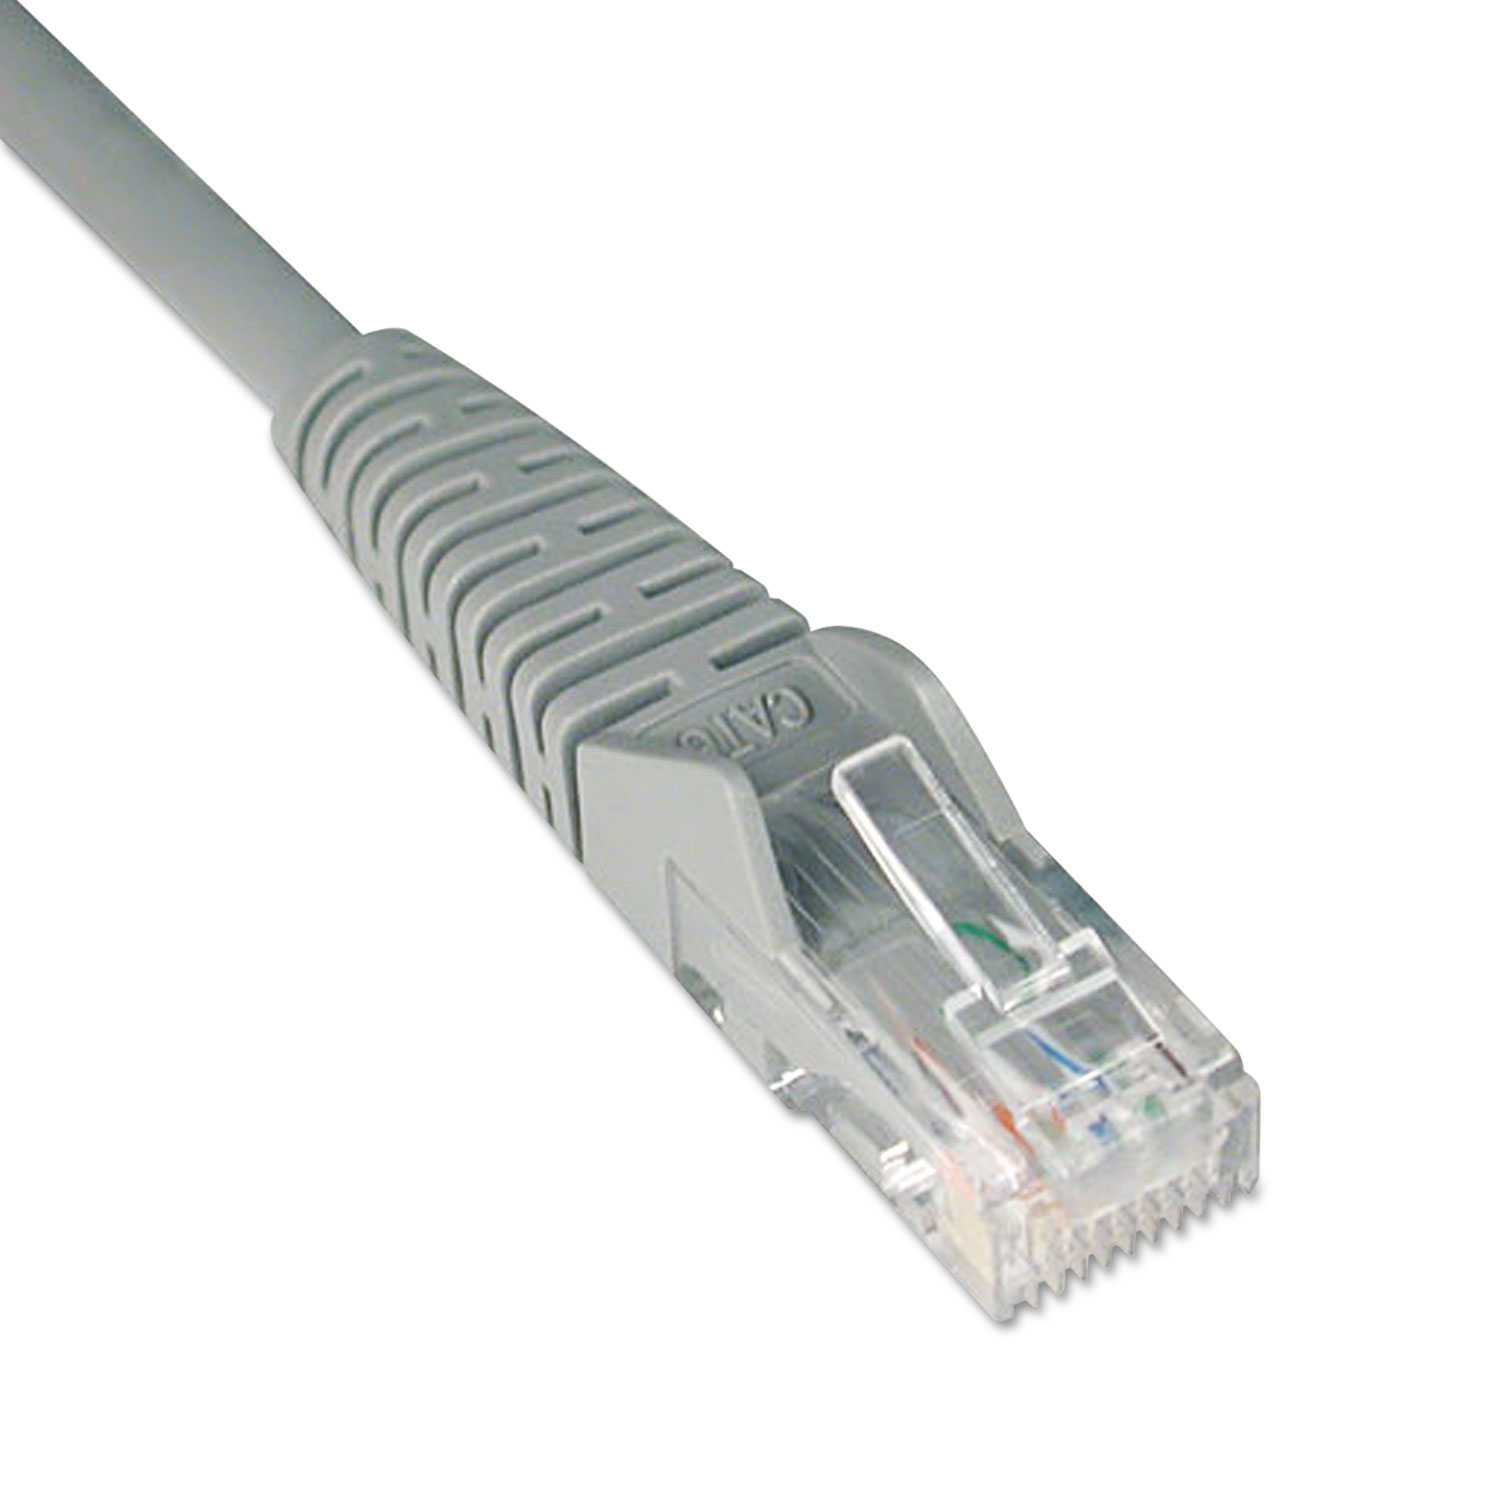  Tripp Lite N201-001-GY Cat6 Gigabit Snagless Molded Patch Cable, RJ45 (M/M), 1 ft., Gray (TRPN201001GY) 